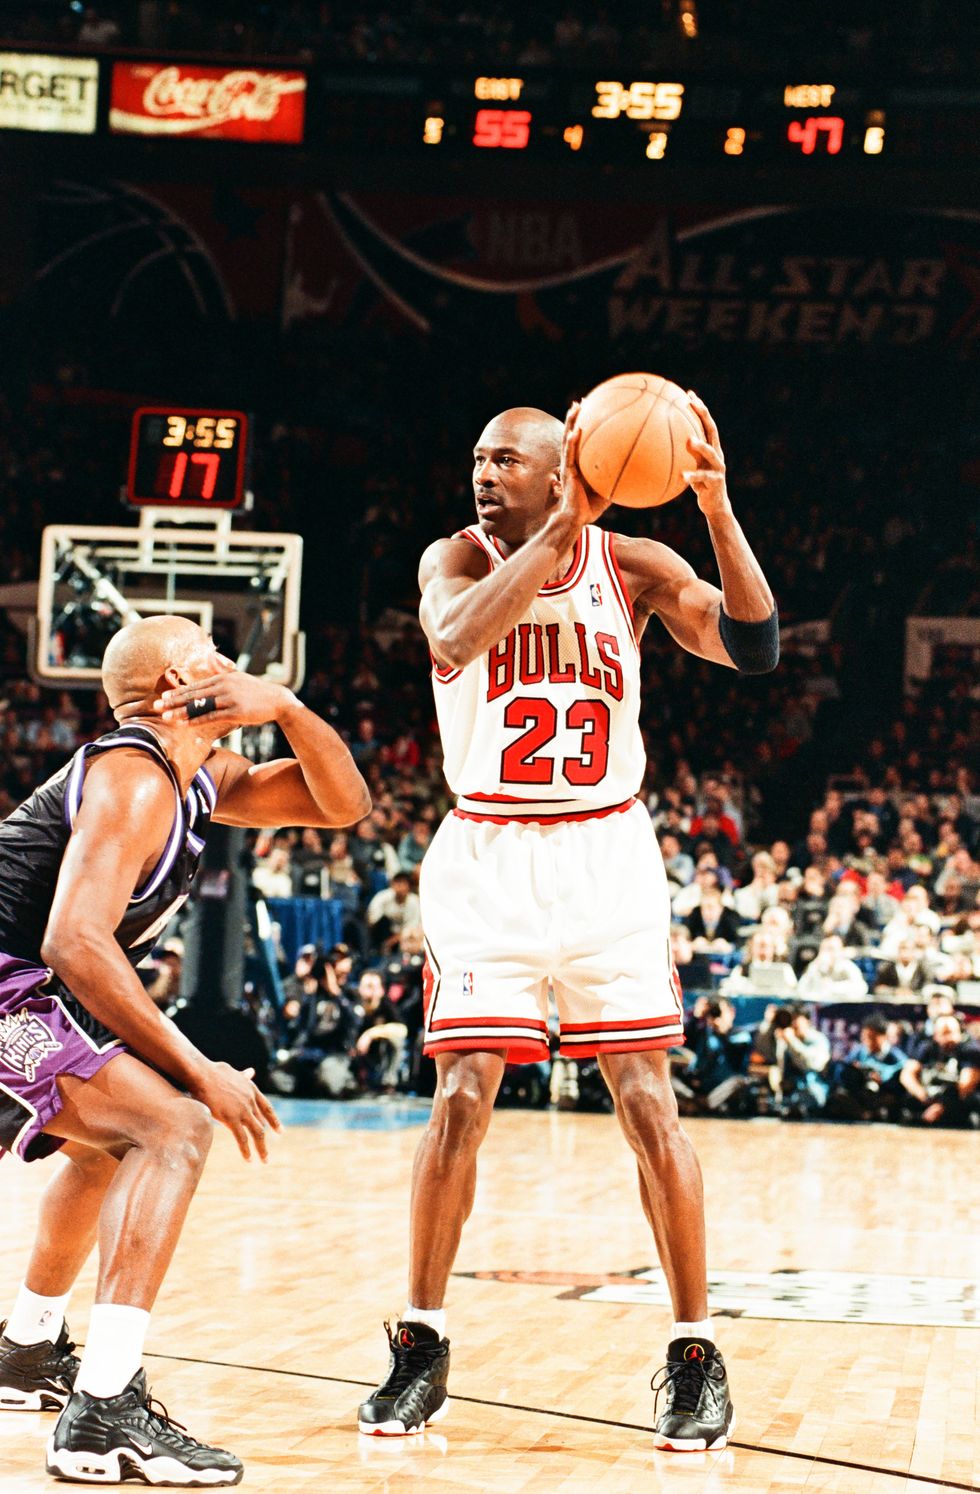 new york, ny february 8 michael jordan of the chicago bulls looks to move the ball during the 1998 nba all star game on february 8, 1998 at madison square garden in new york city photo by sporting news via getty images via getty images